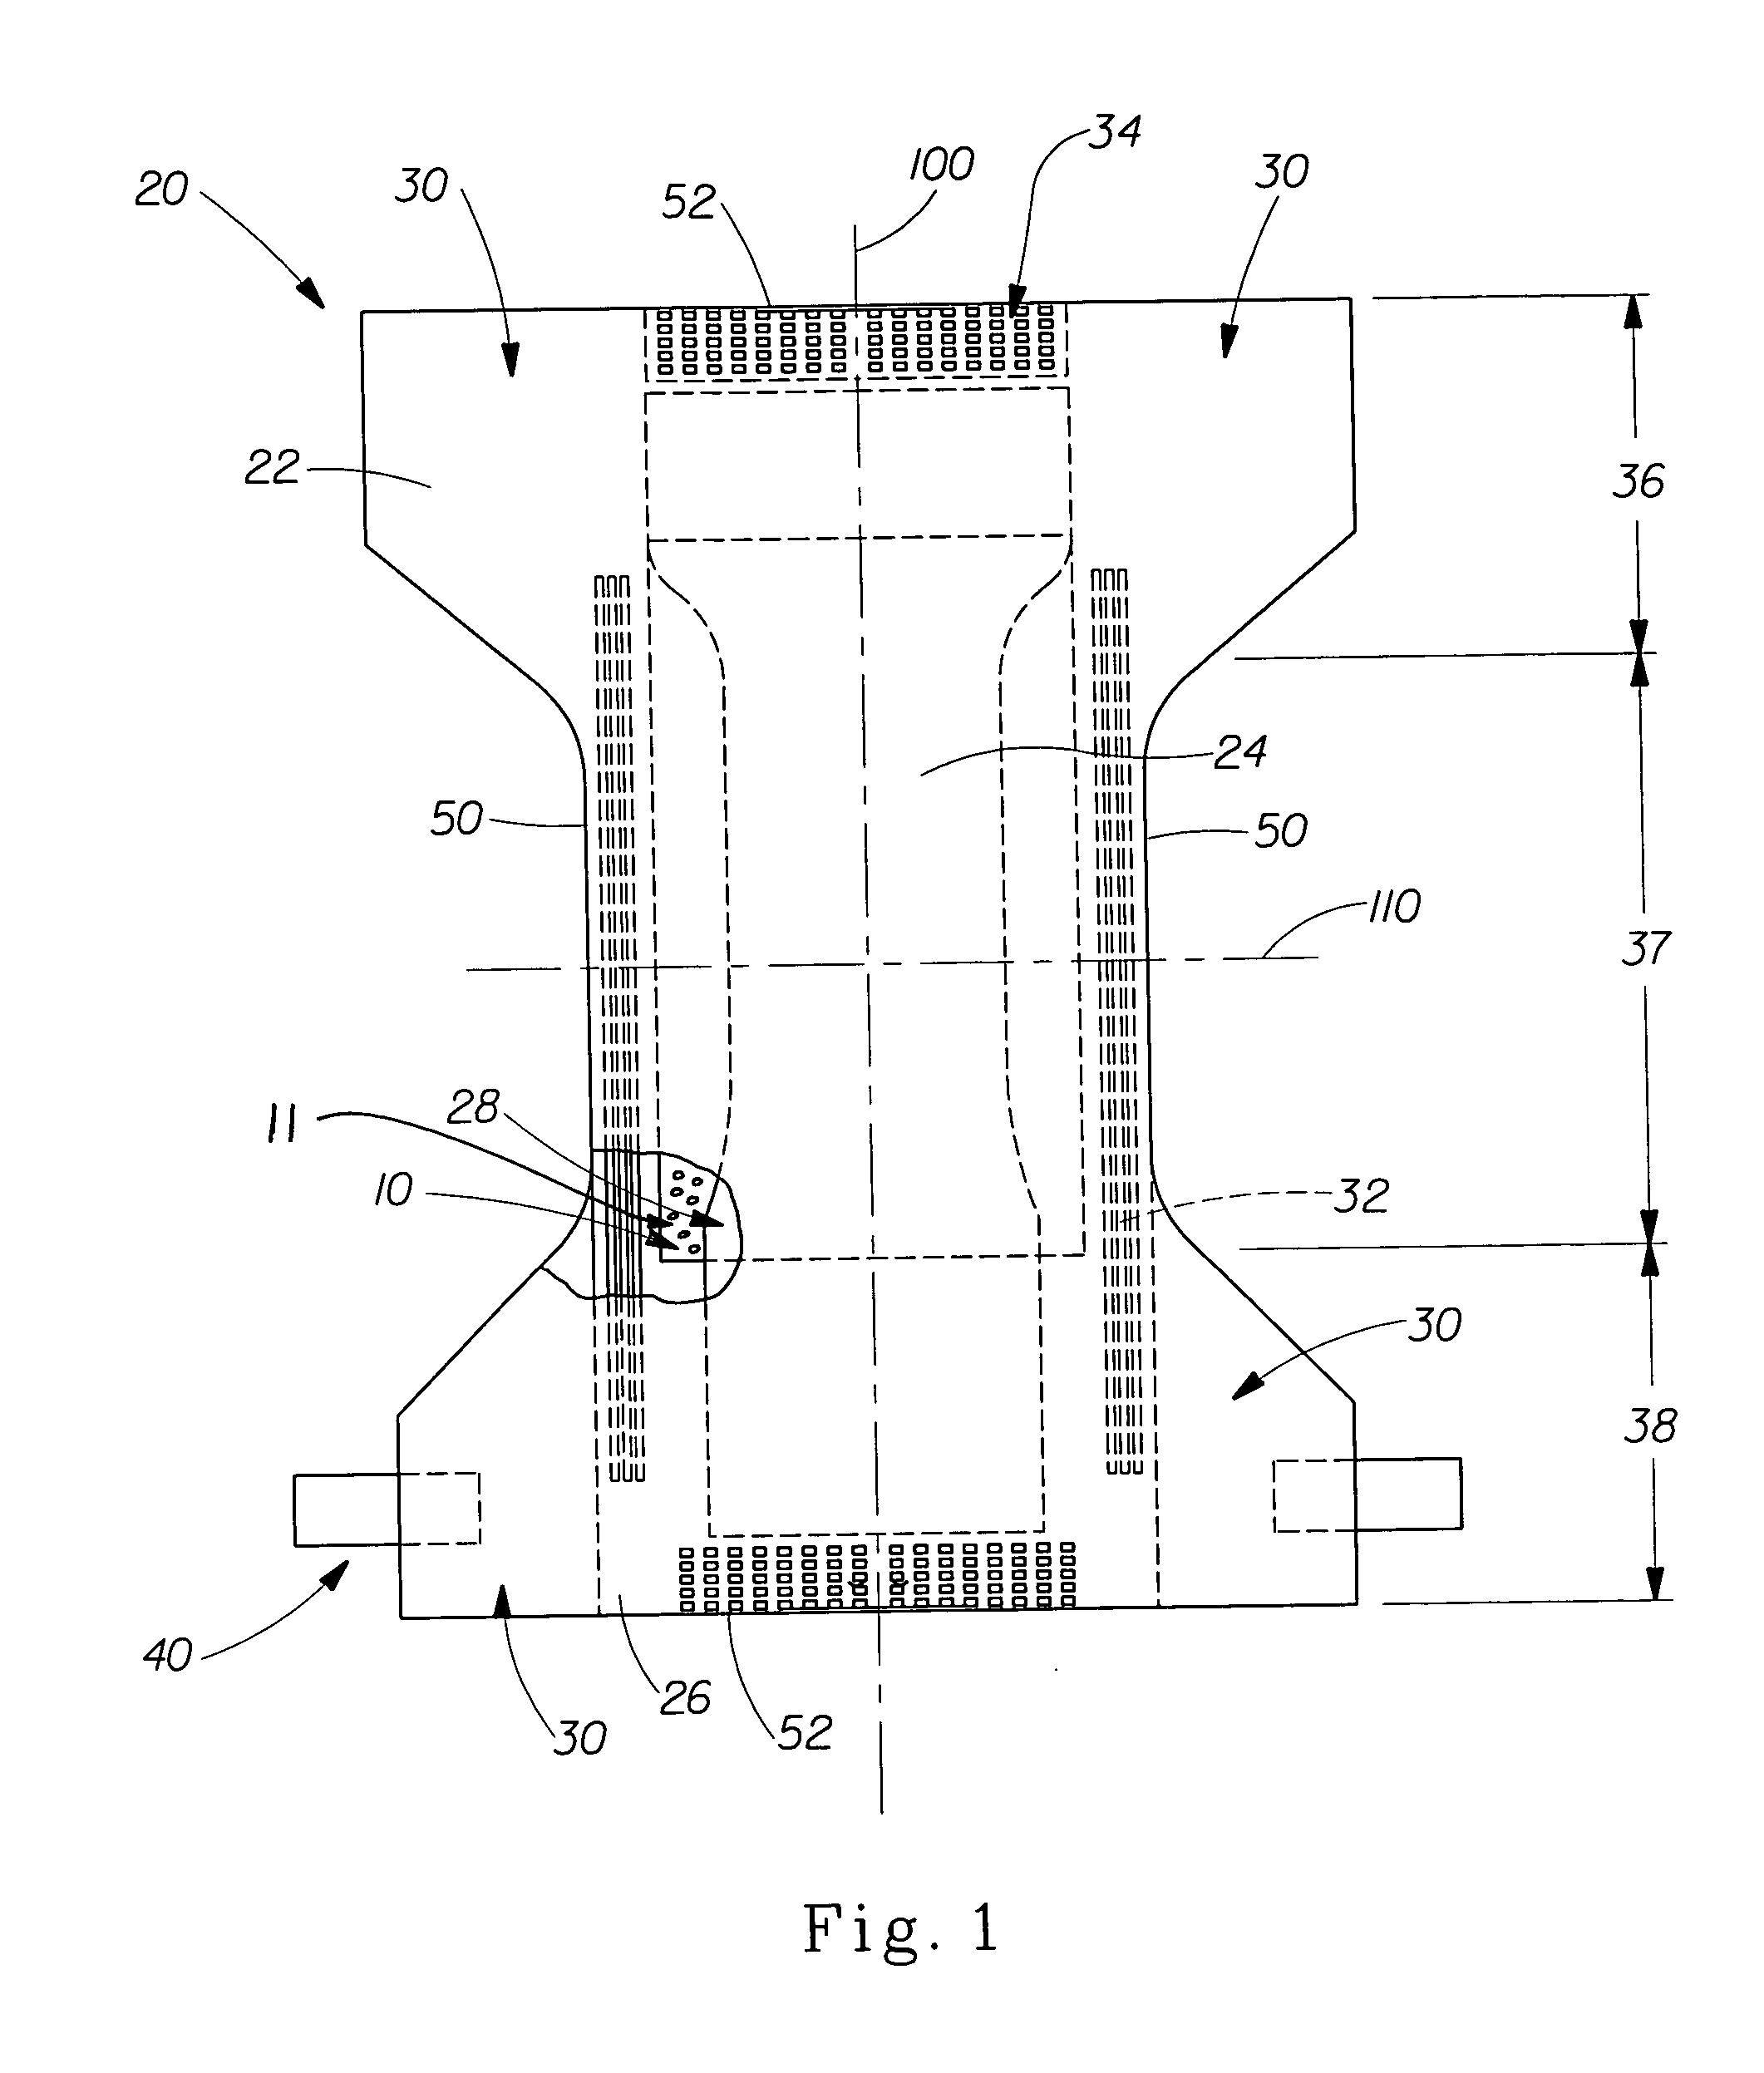 Breathable absorbent articles and composites comprising a vapor permeable, liquid barrier layer with thickening capabilities